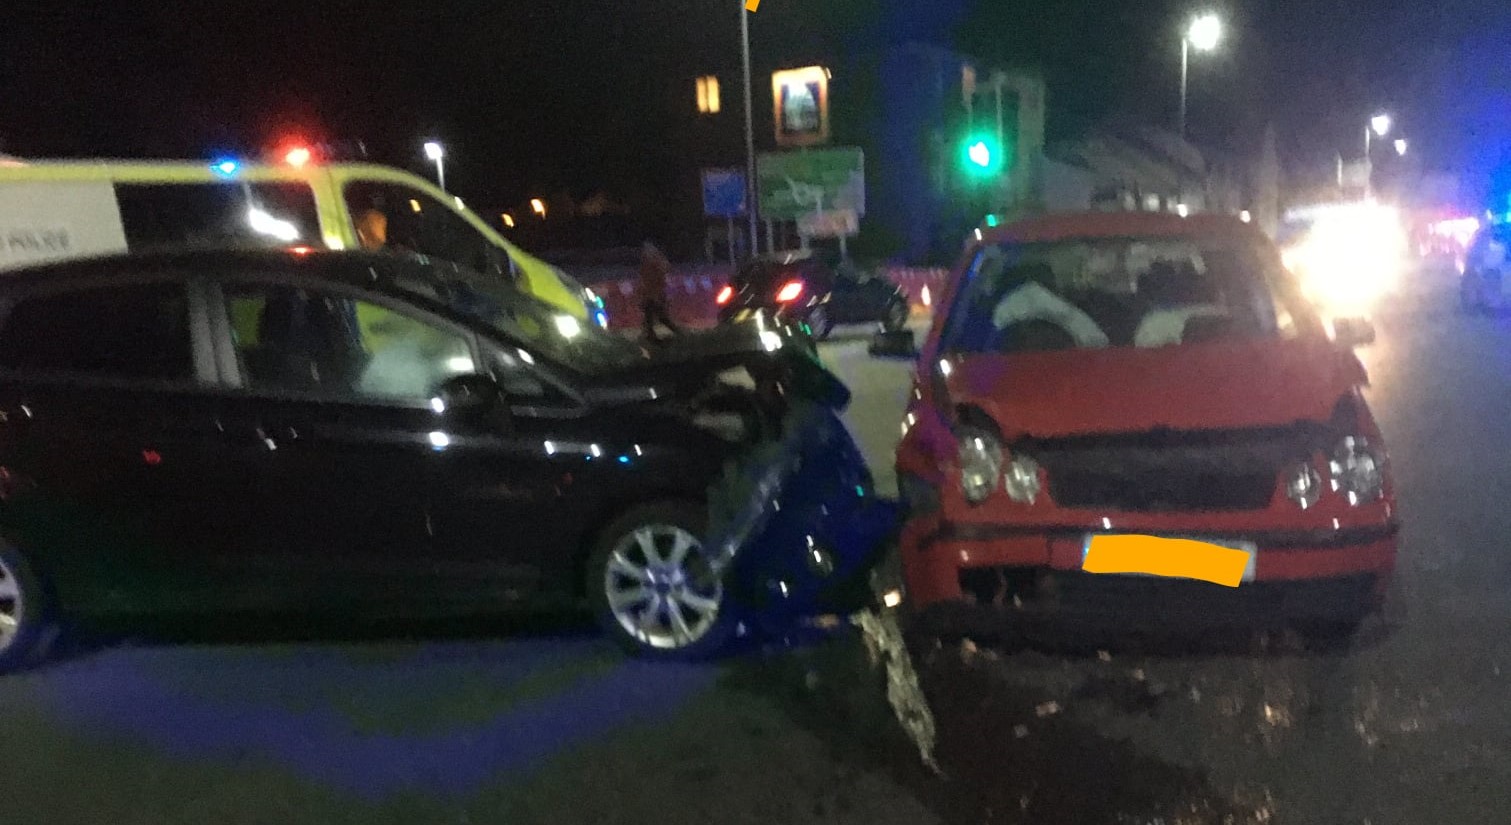 NEWS | Emergency services respond to RTC near Sainsbury’s in Hereford – MORE DETAILS